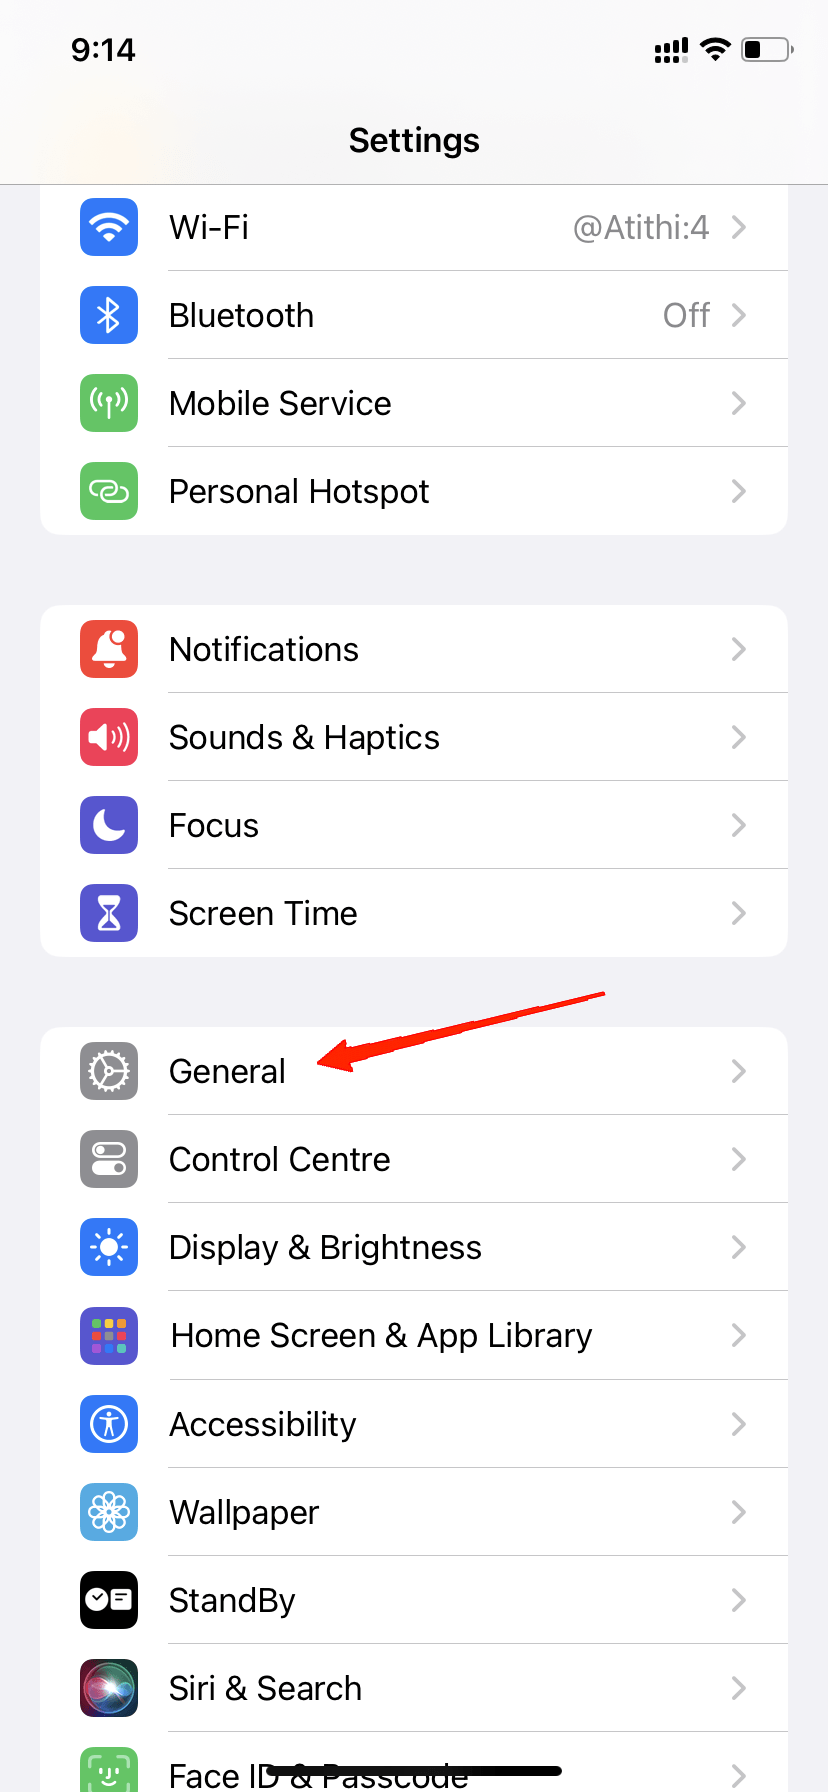 Open-Settings-and-go-to-General